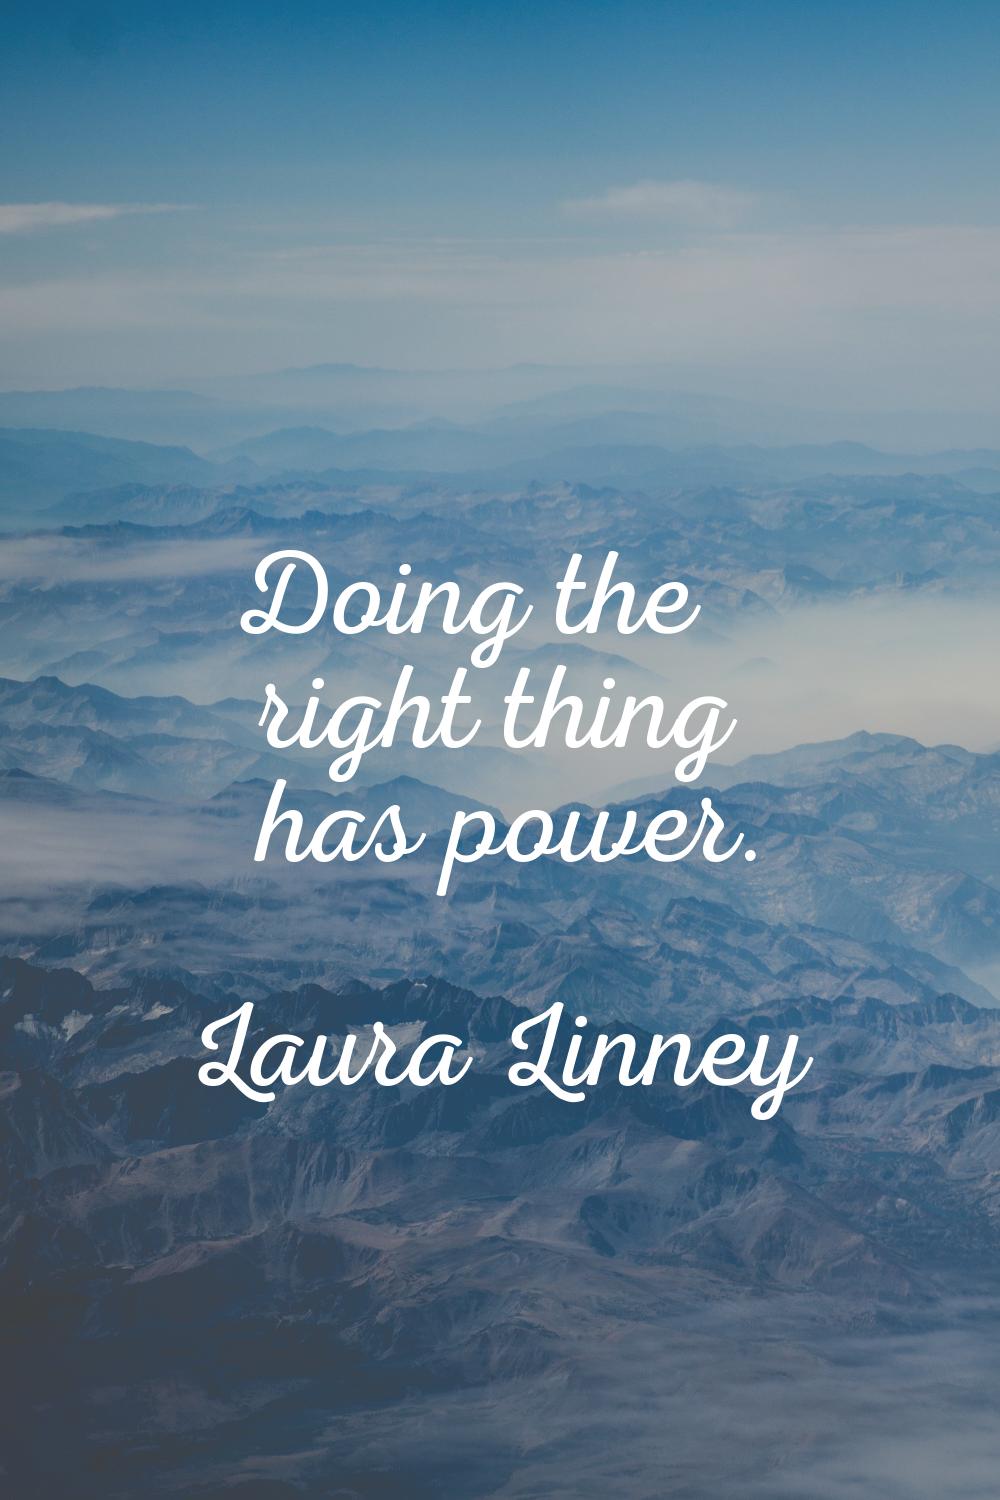 Doing the right thing has power.